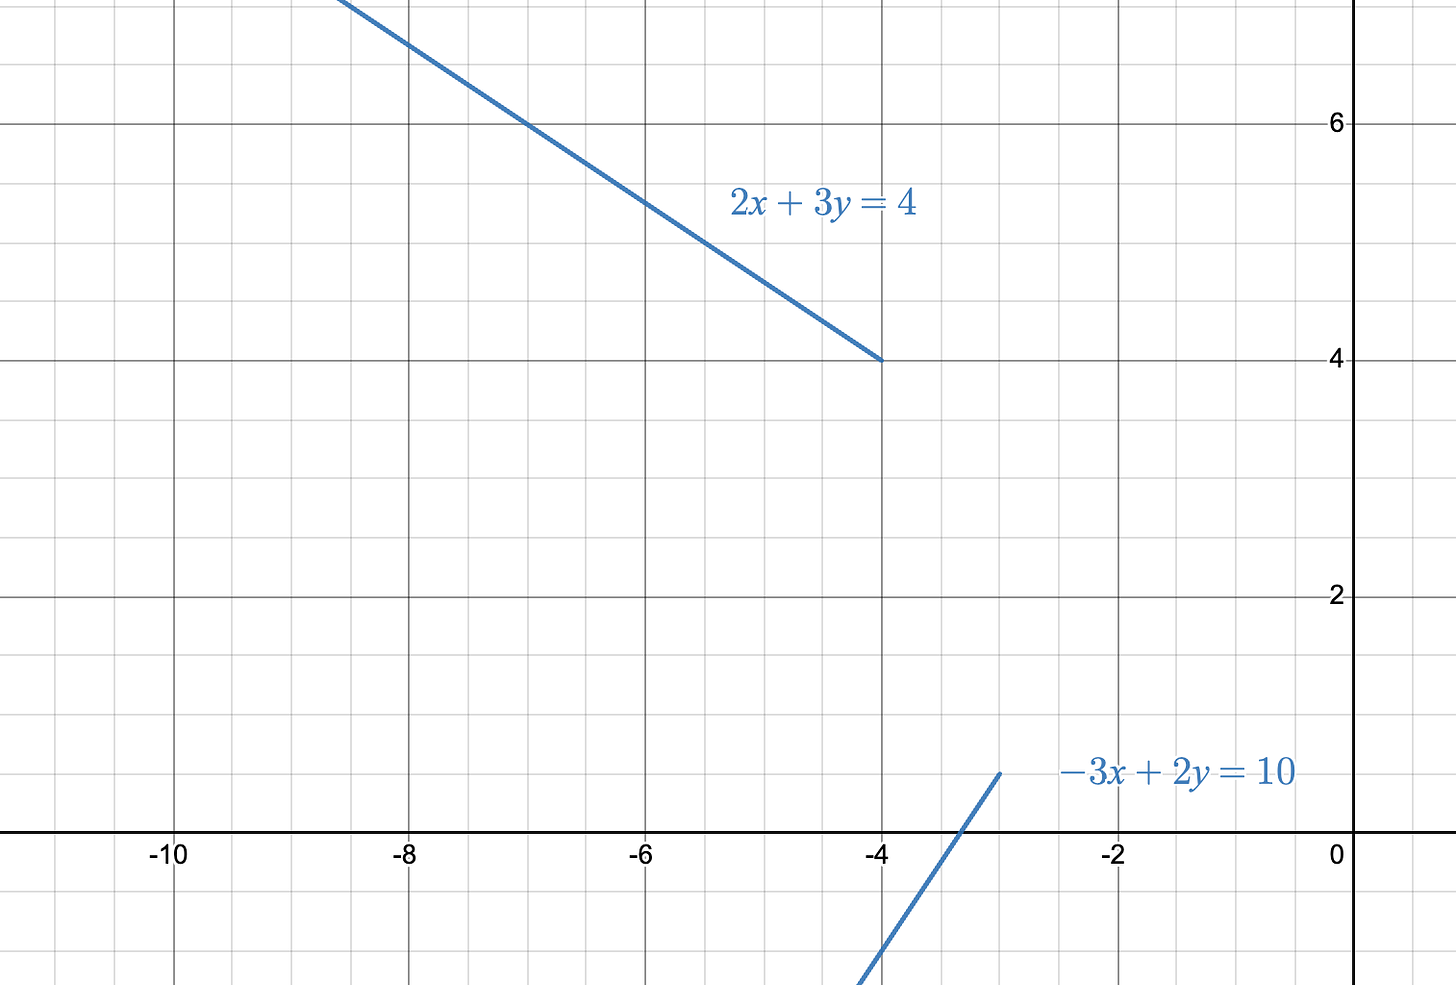 A graph of a system of equations 2x + 3y = 4 and -3x + 2y = 10.